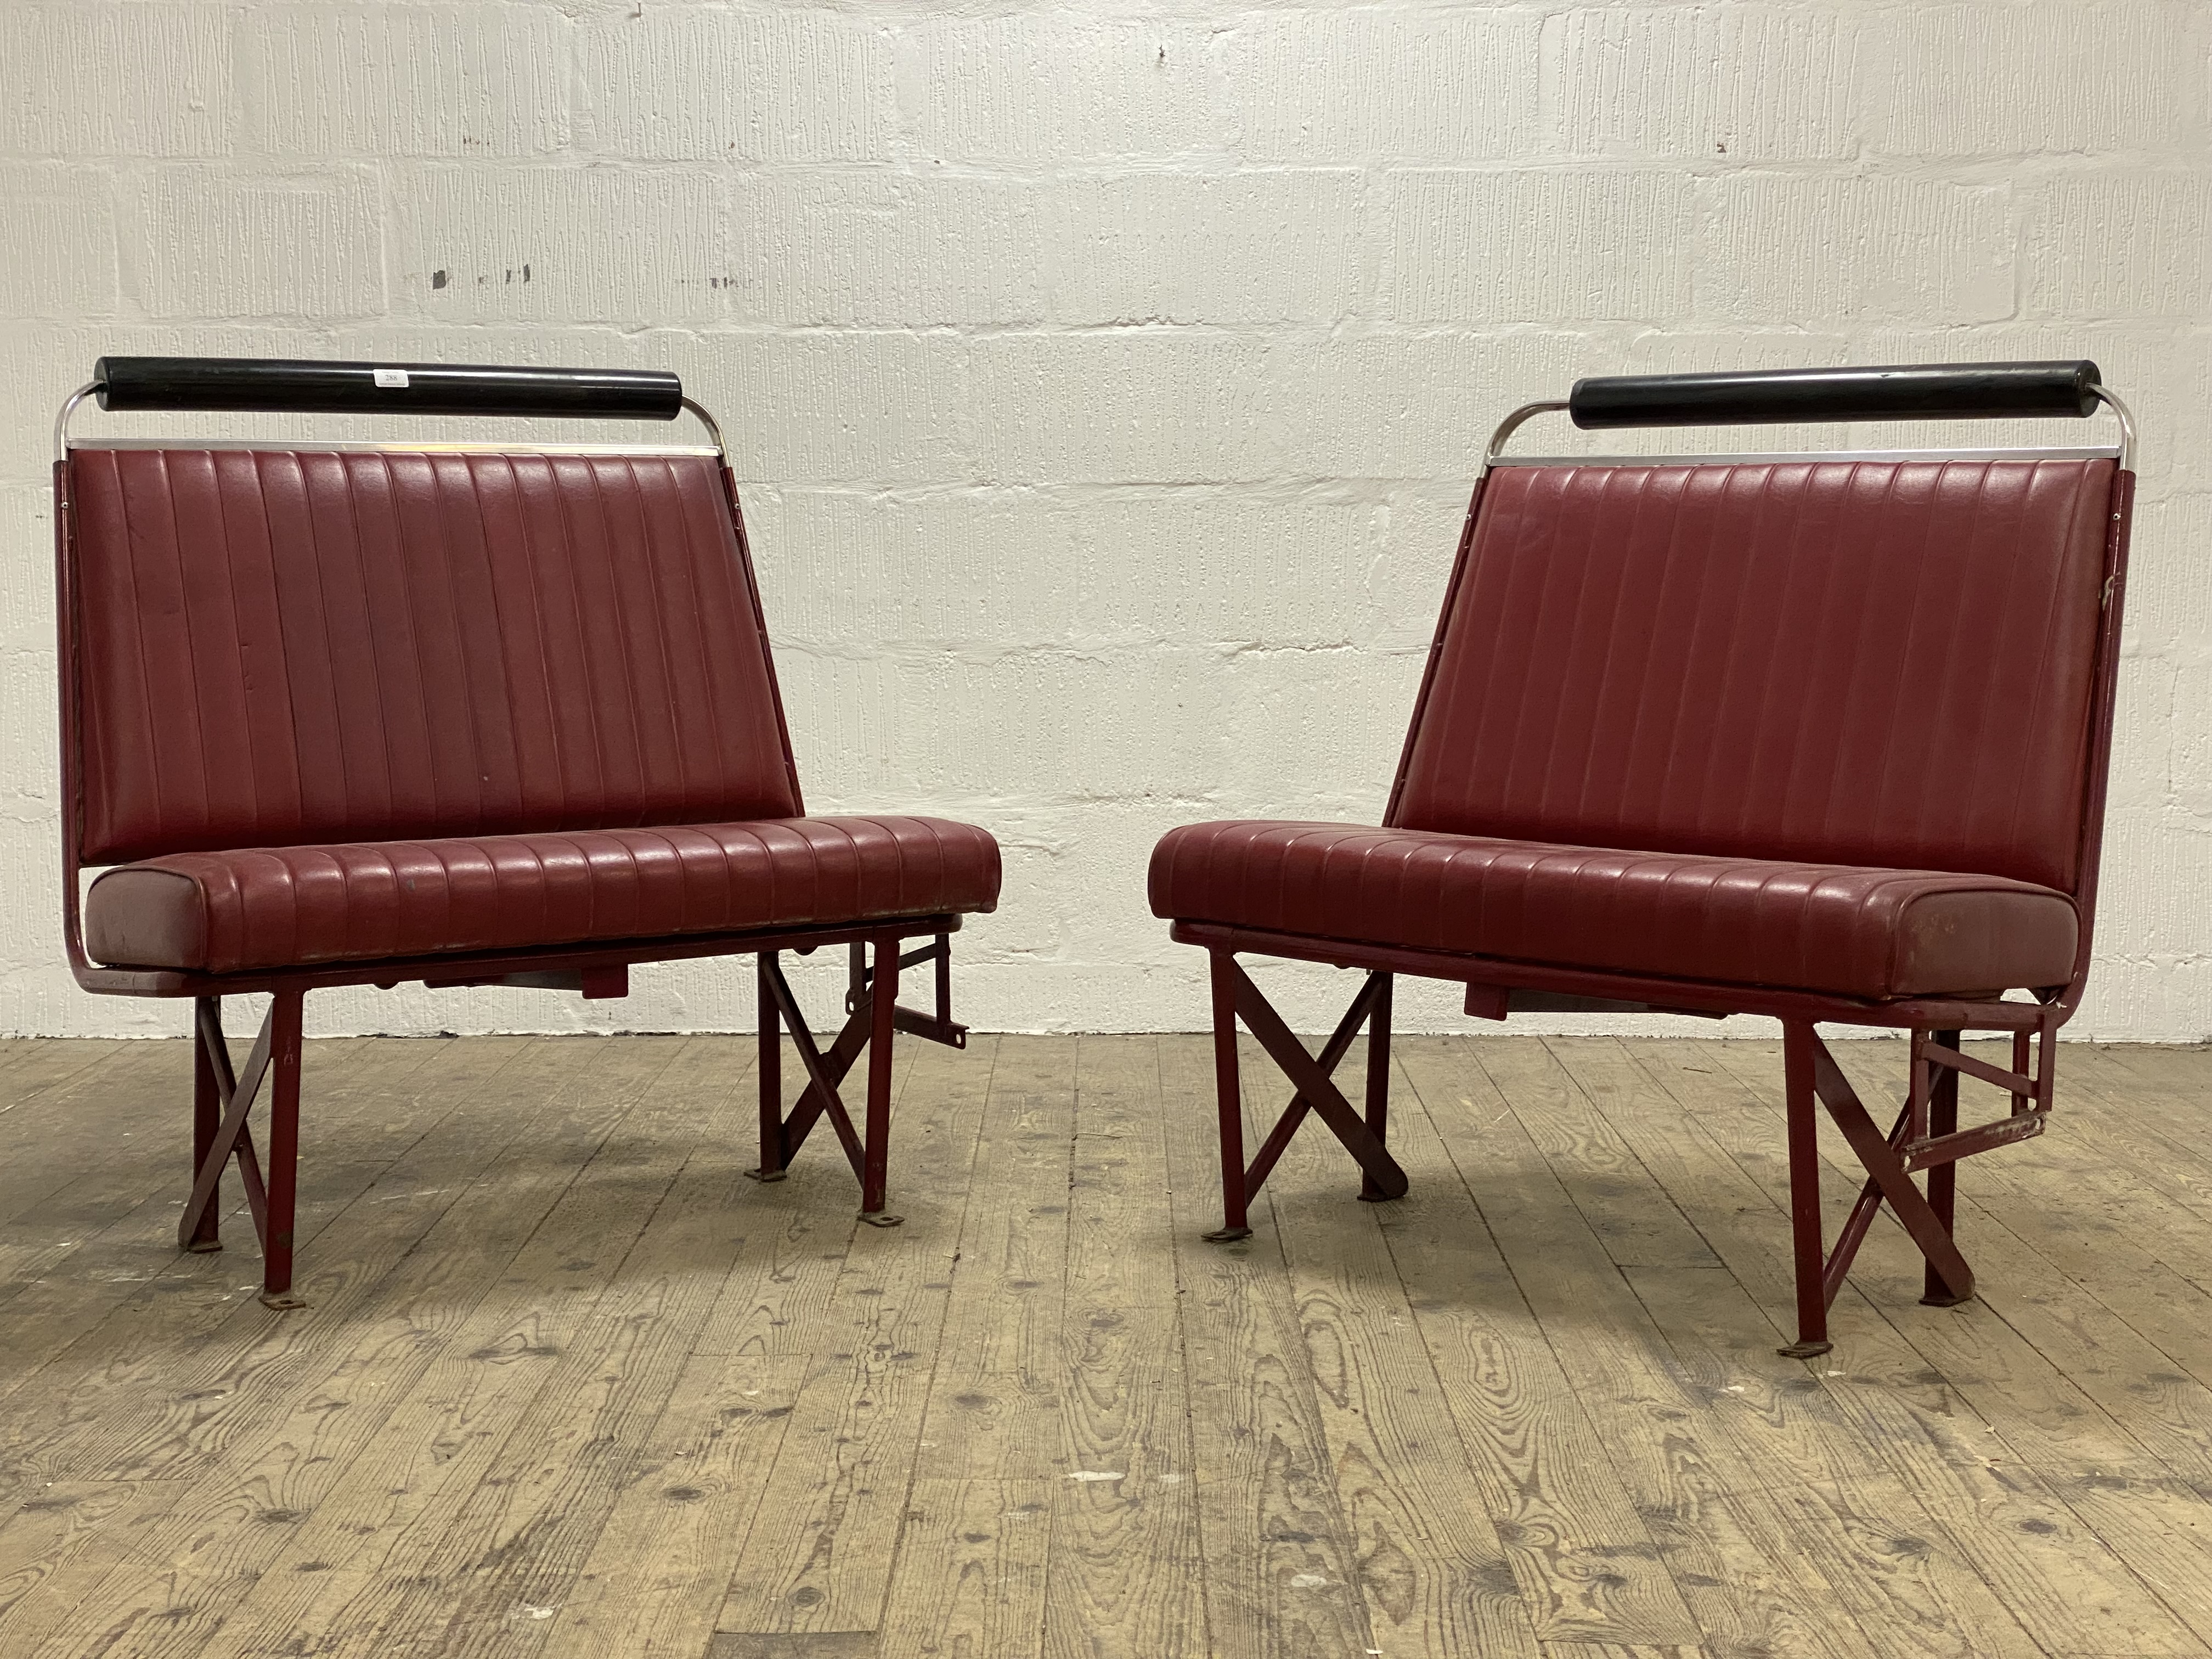 A pair of 1960's banquets / bench seats, of tubular construction and with red vinyl seat and back